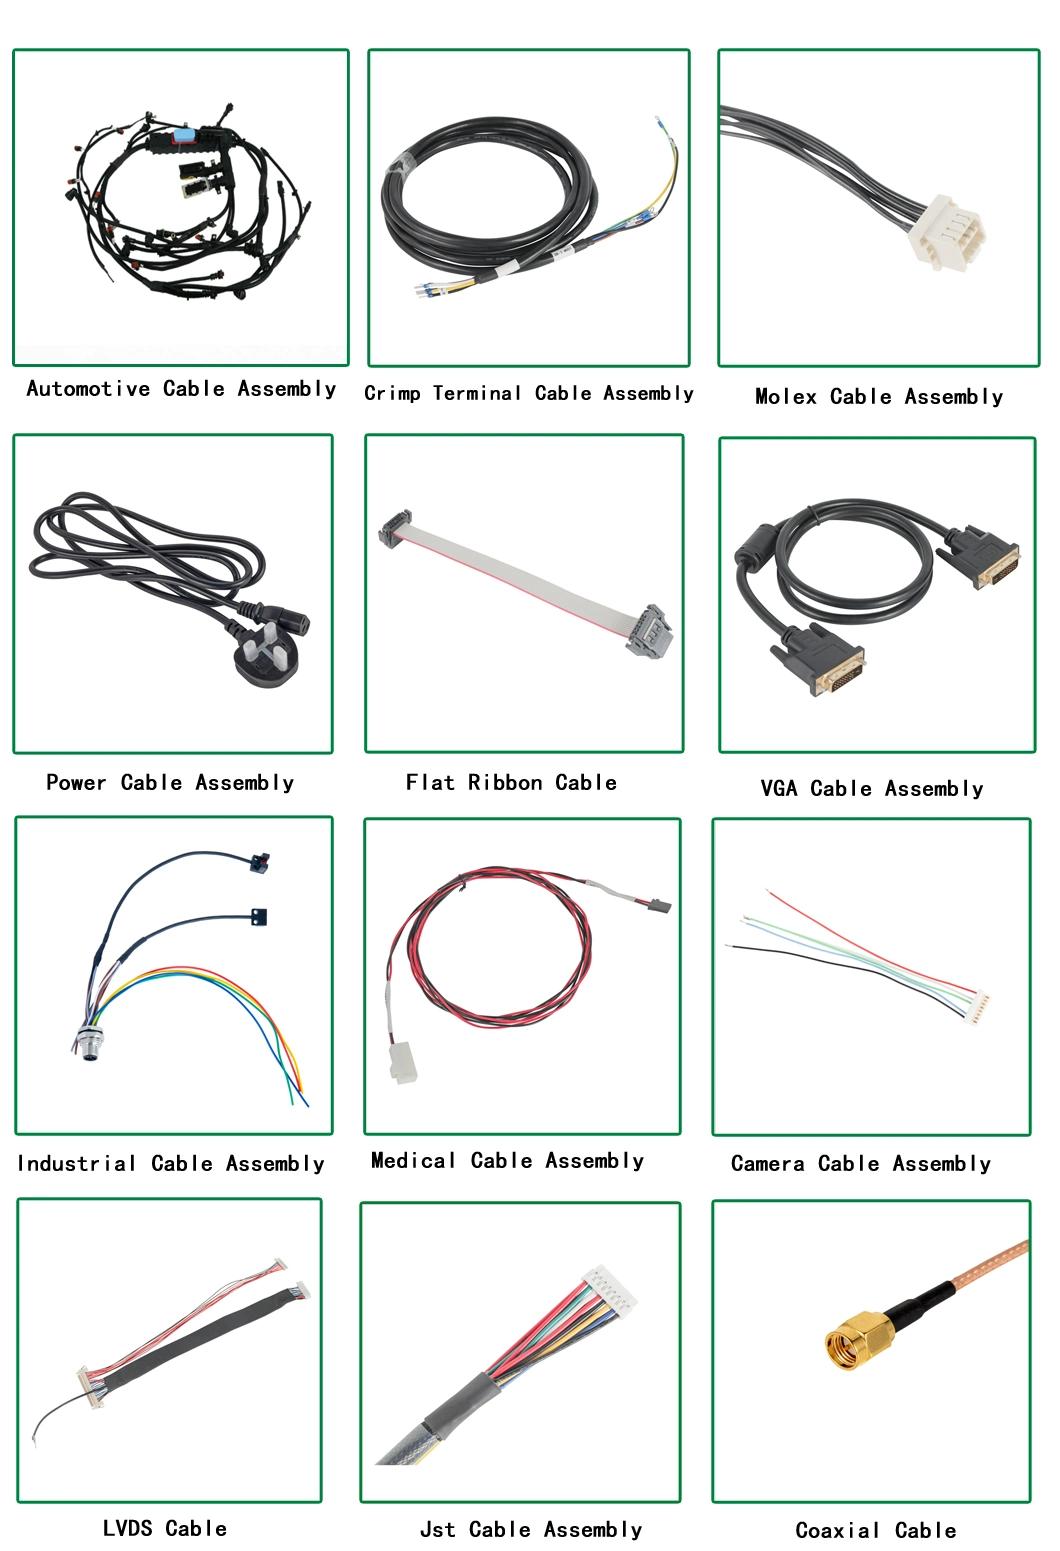 BNC, SMA, TNC, MCX, MMCX, N-Type, SMB, RF Jumper Cable Wire Harness/Cable Assembly